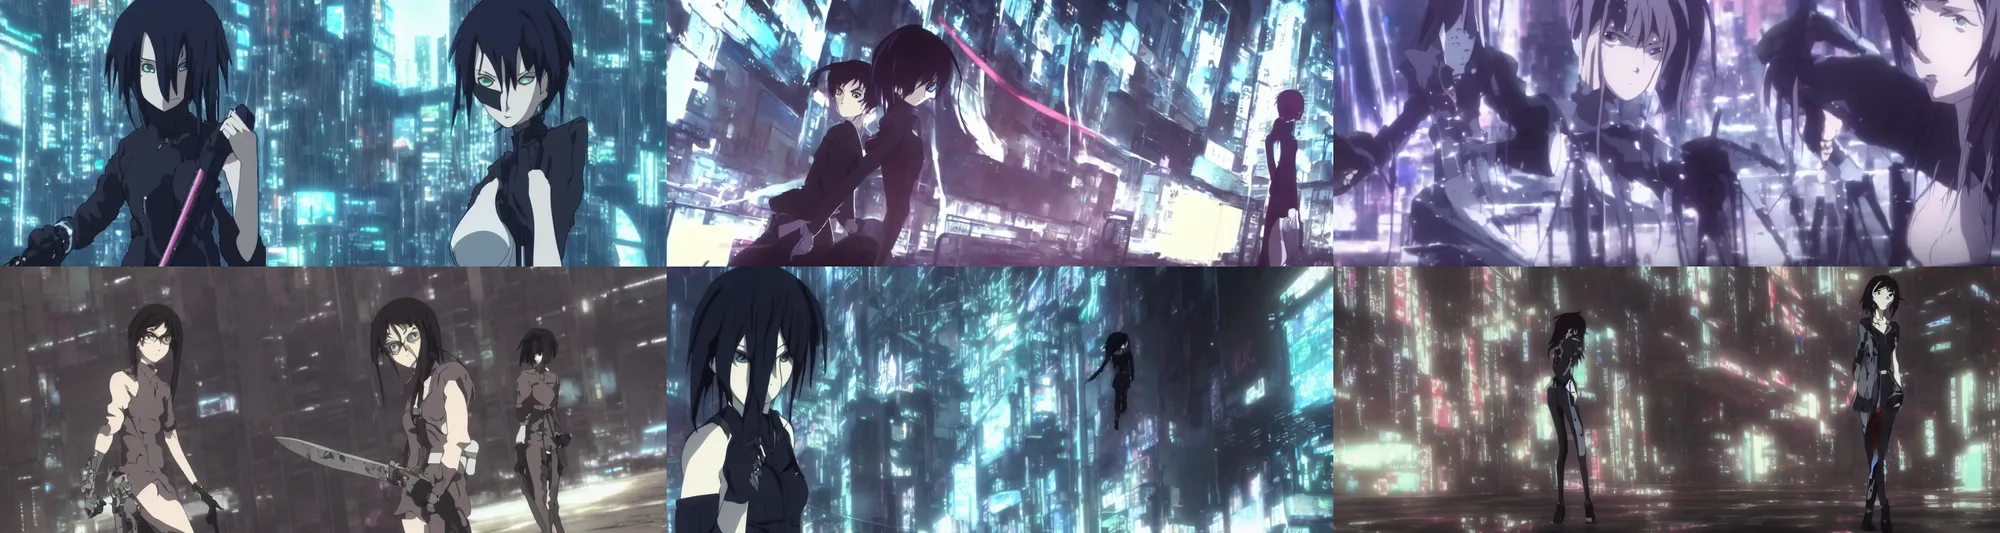 Prompt: Re-L from ergo proxy as a cyberpunk girl with a sword, in a screenshot from the anime film Fighting Techno Ghosts by makoto shinkai